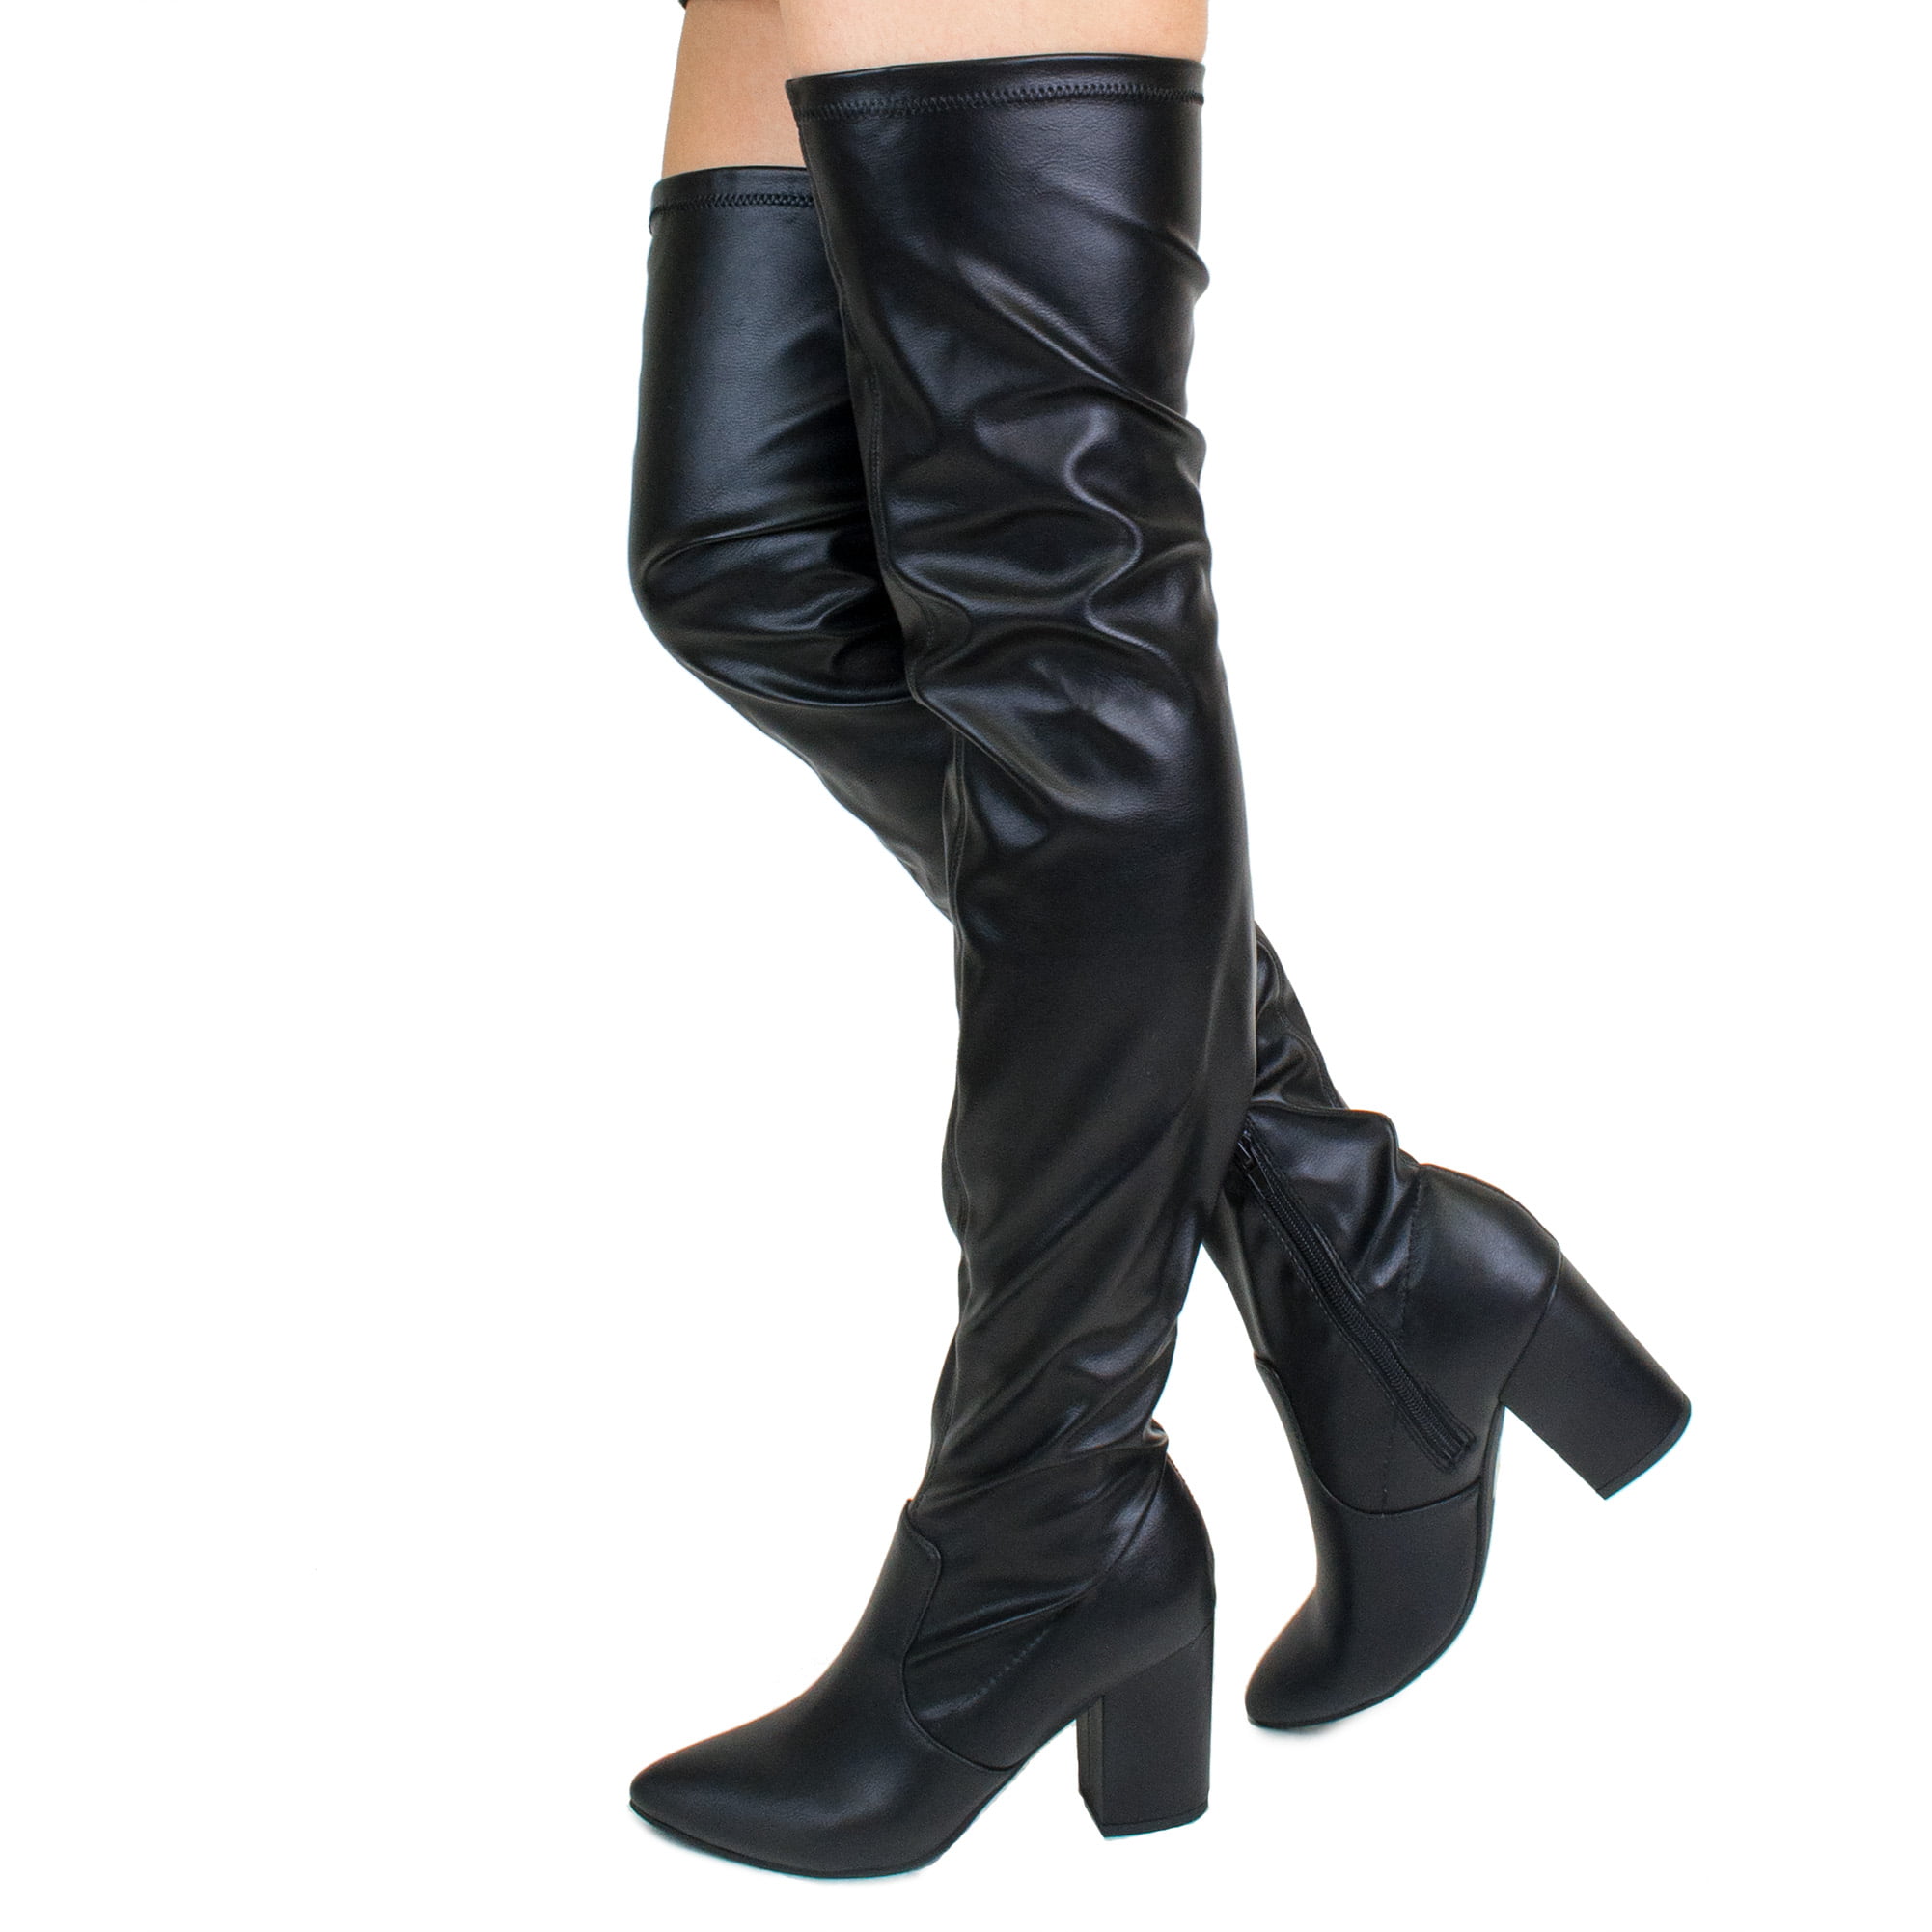 Womens Thigh High Party Boots Over The Knee Ladies Stretchy Block Mid Heel Size 